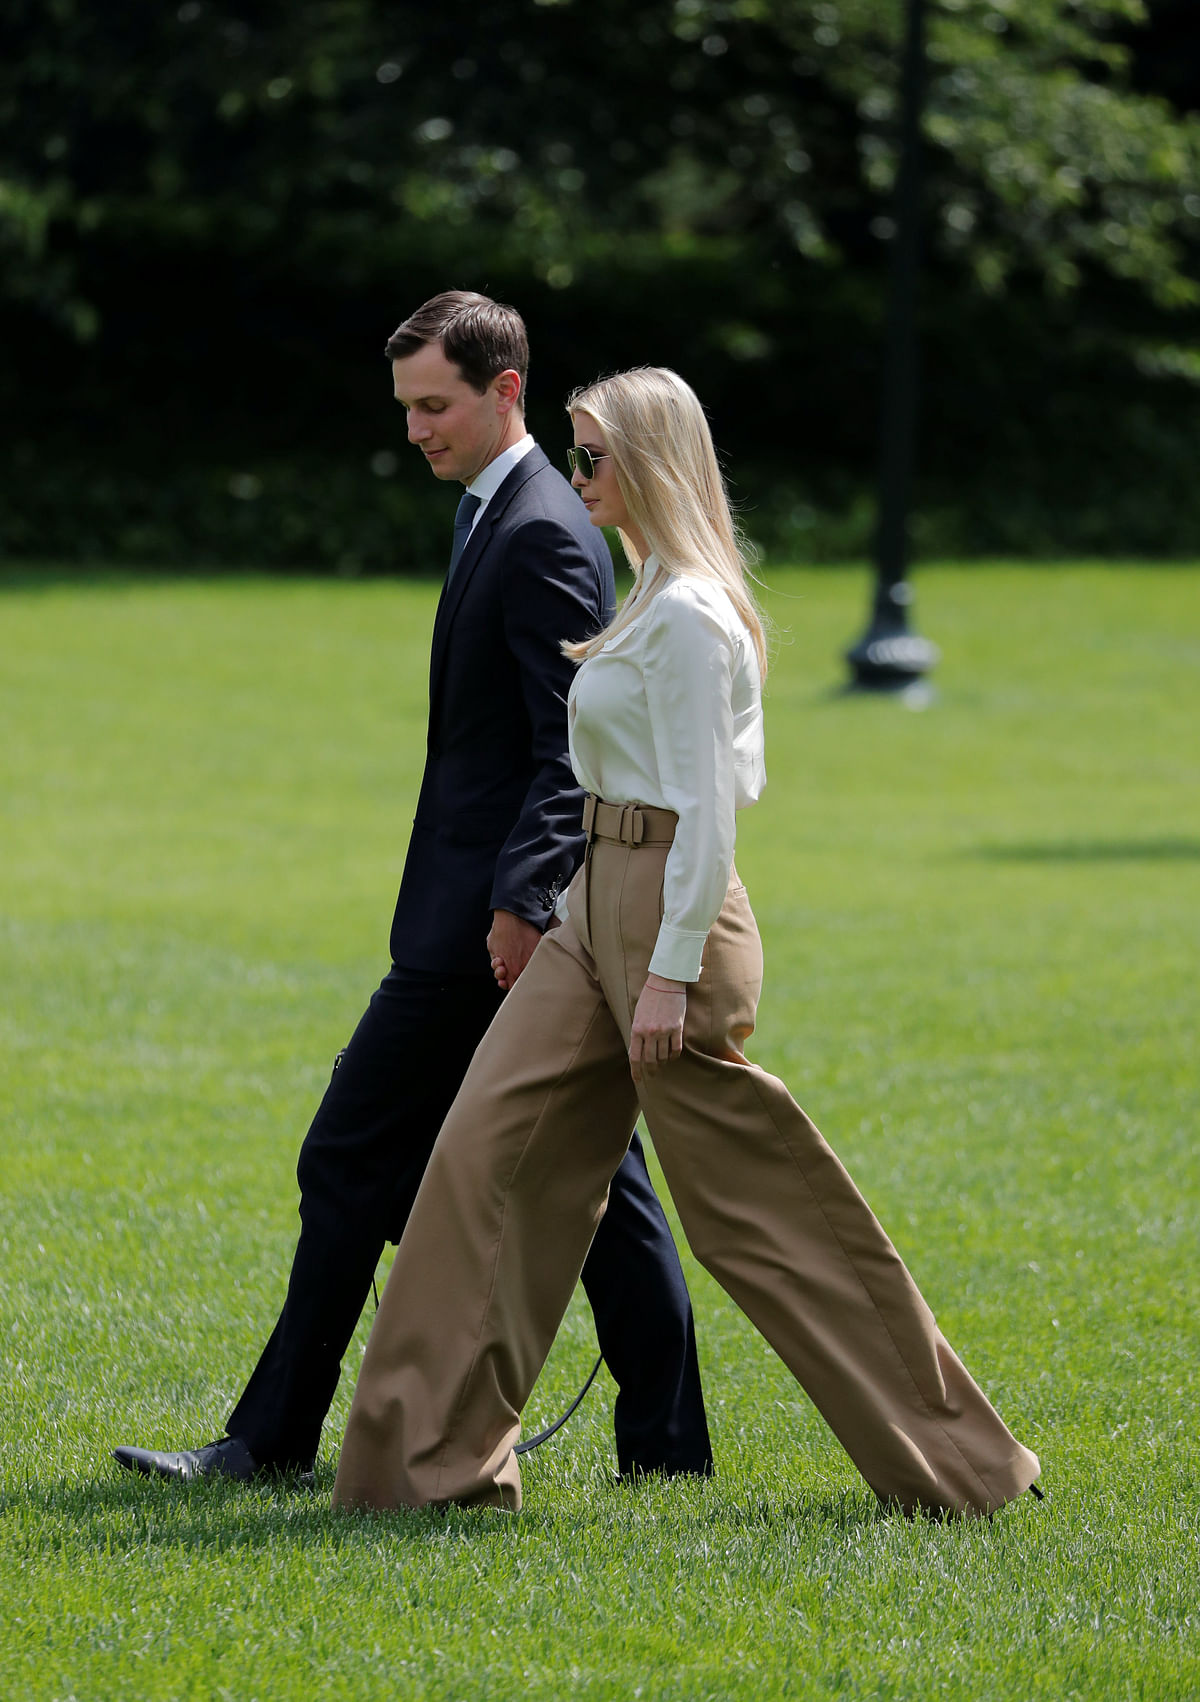 White House senior advisers Jared Kushner and wife Ivanka Trump walk on the South Lawn of the White House as US president Donald Trump departed Washington for the Camp David presidential retreat in Maryland, US on 1 June 2018. Photo: Reuters